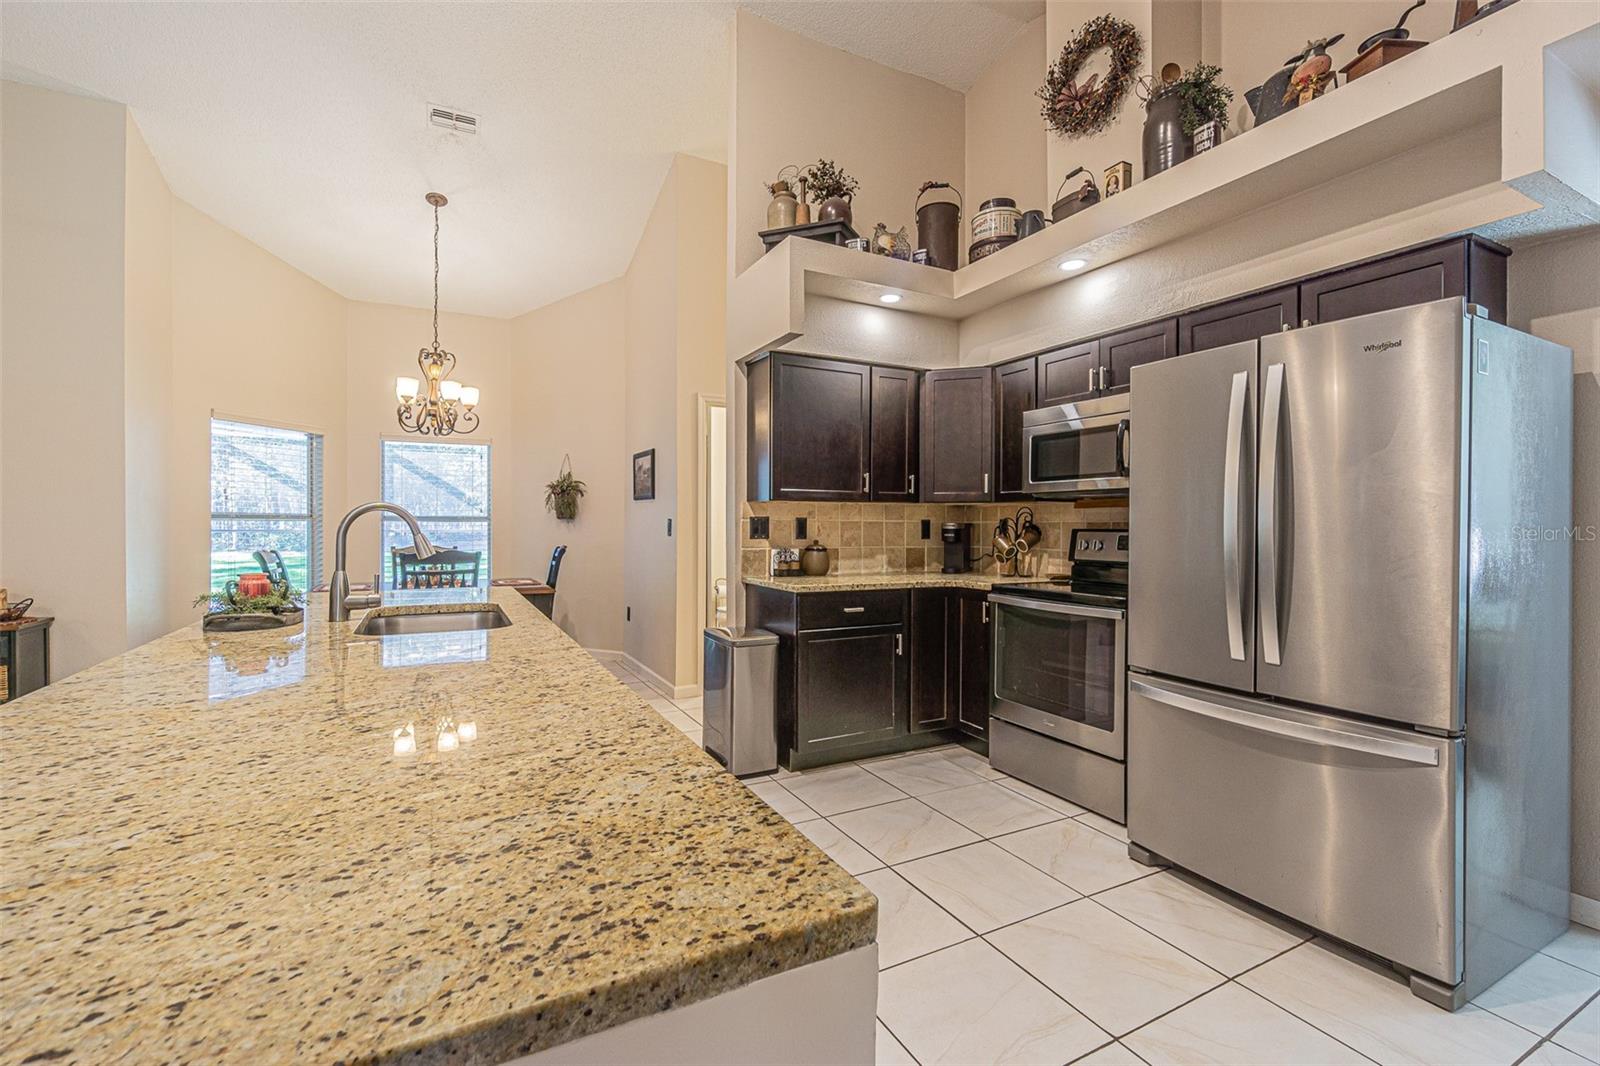 Beautiful wood cabinets, large granite topped island, and all stainless appliances new in 2019